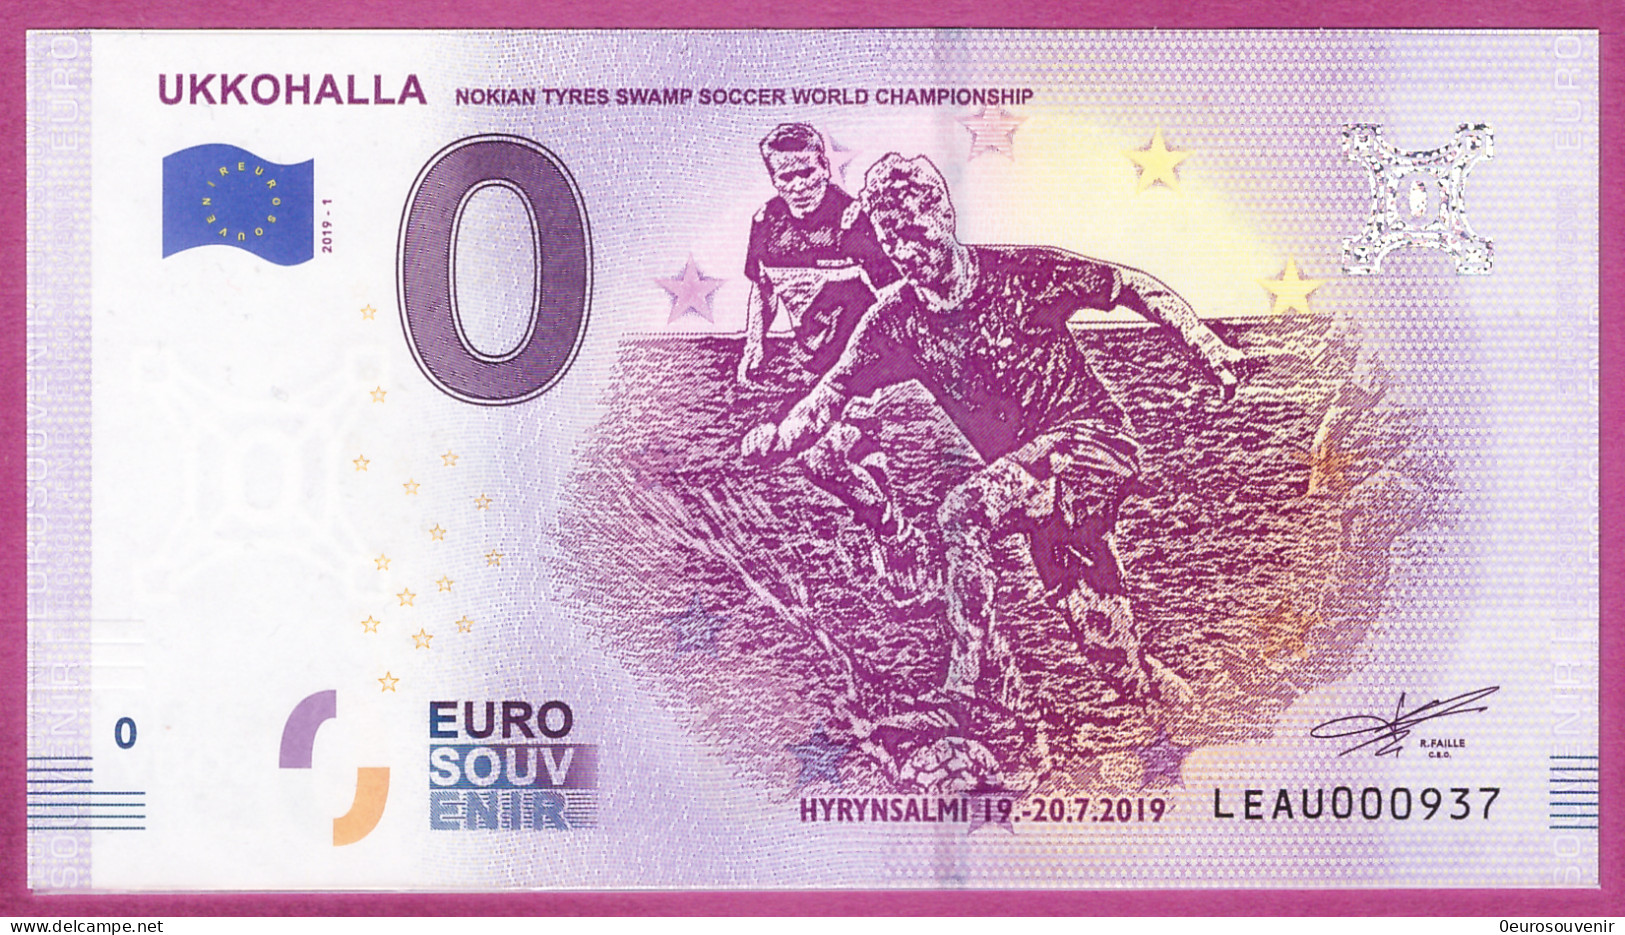 0-Euro LEAU 2019-1 UKKOHALLA - NOKIAN TYRES SWAMP SOCCER WORD CHAMPIONSHIP - Private Proofs / Unofficial